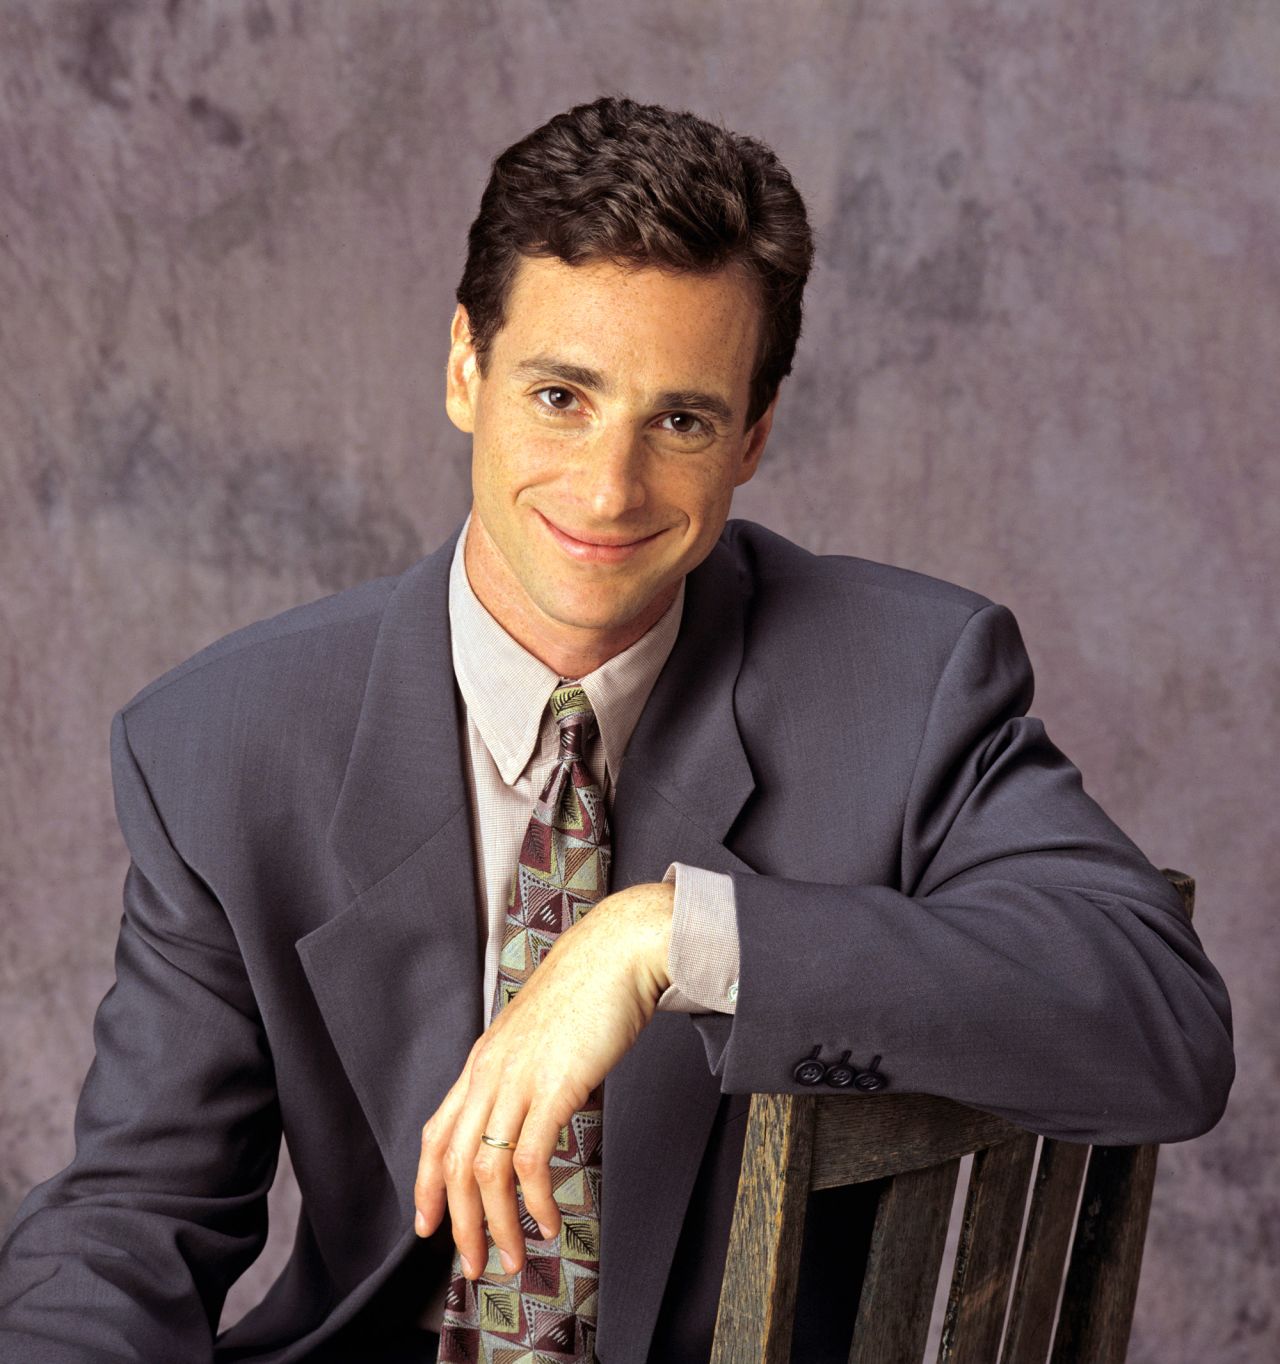 Bob Saget, the comedian and actor who played wholesome patriarch Danny Tanner on the sitcom 